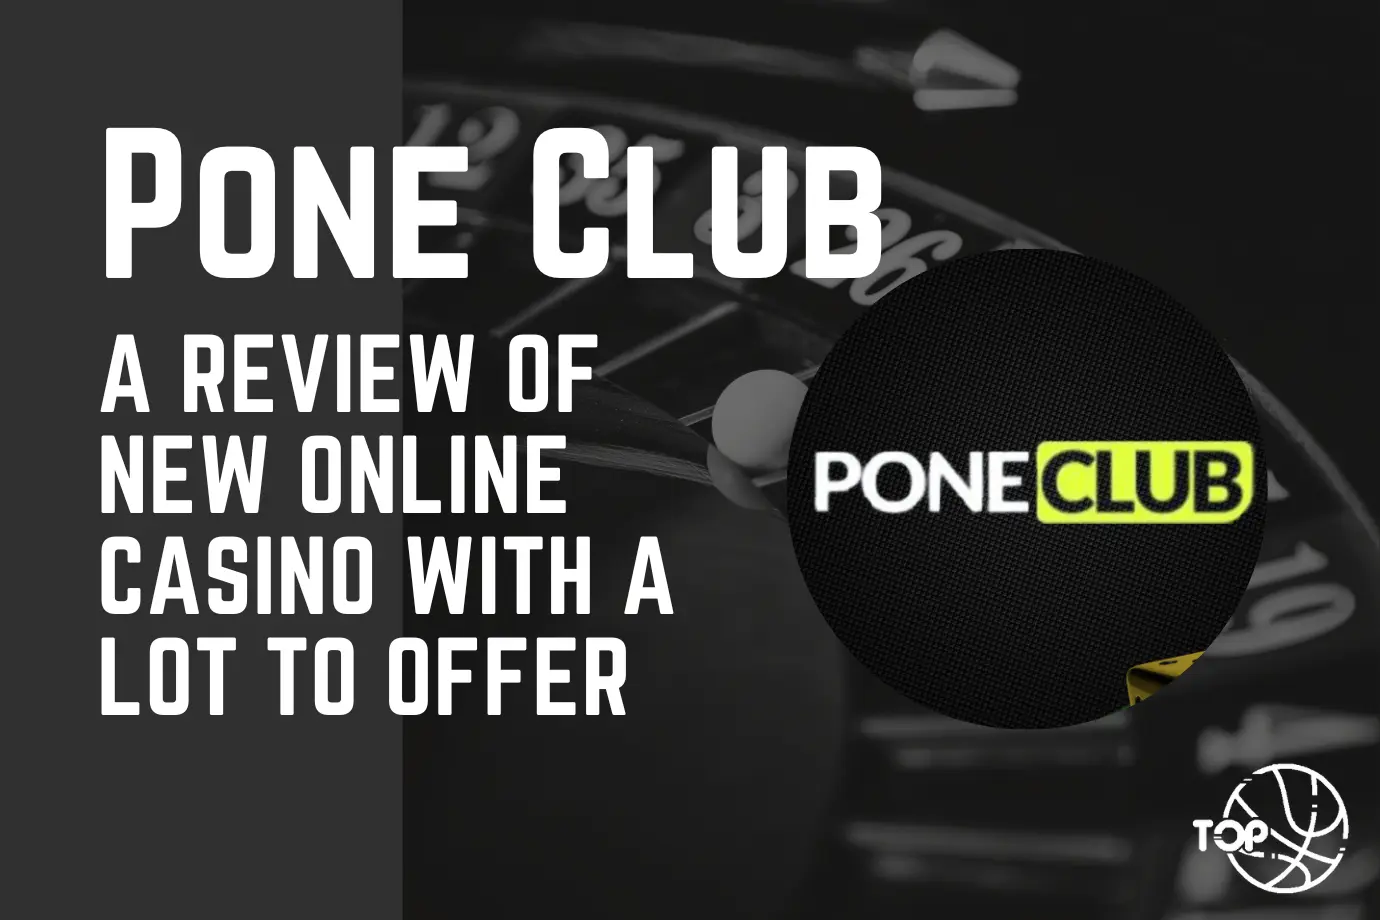 Pone Club: A Review of New Online Casino With a Lot to Offer